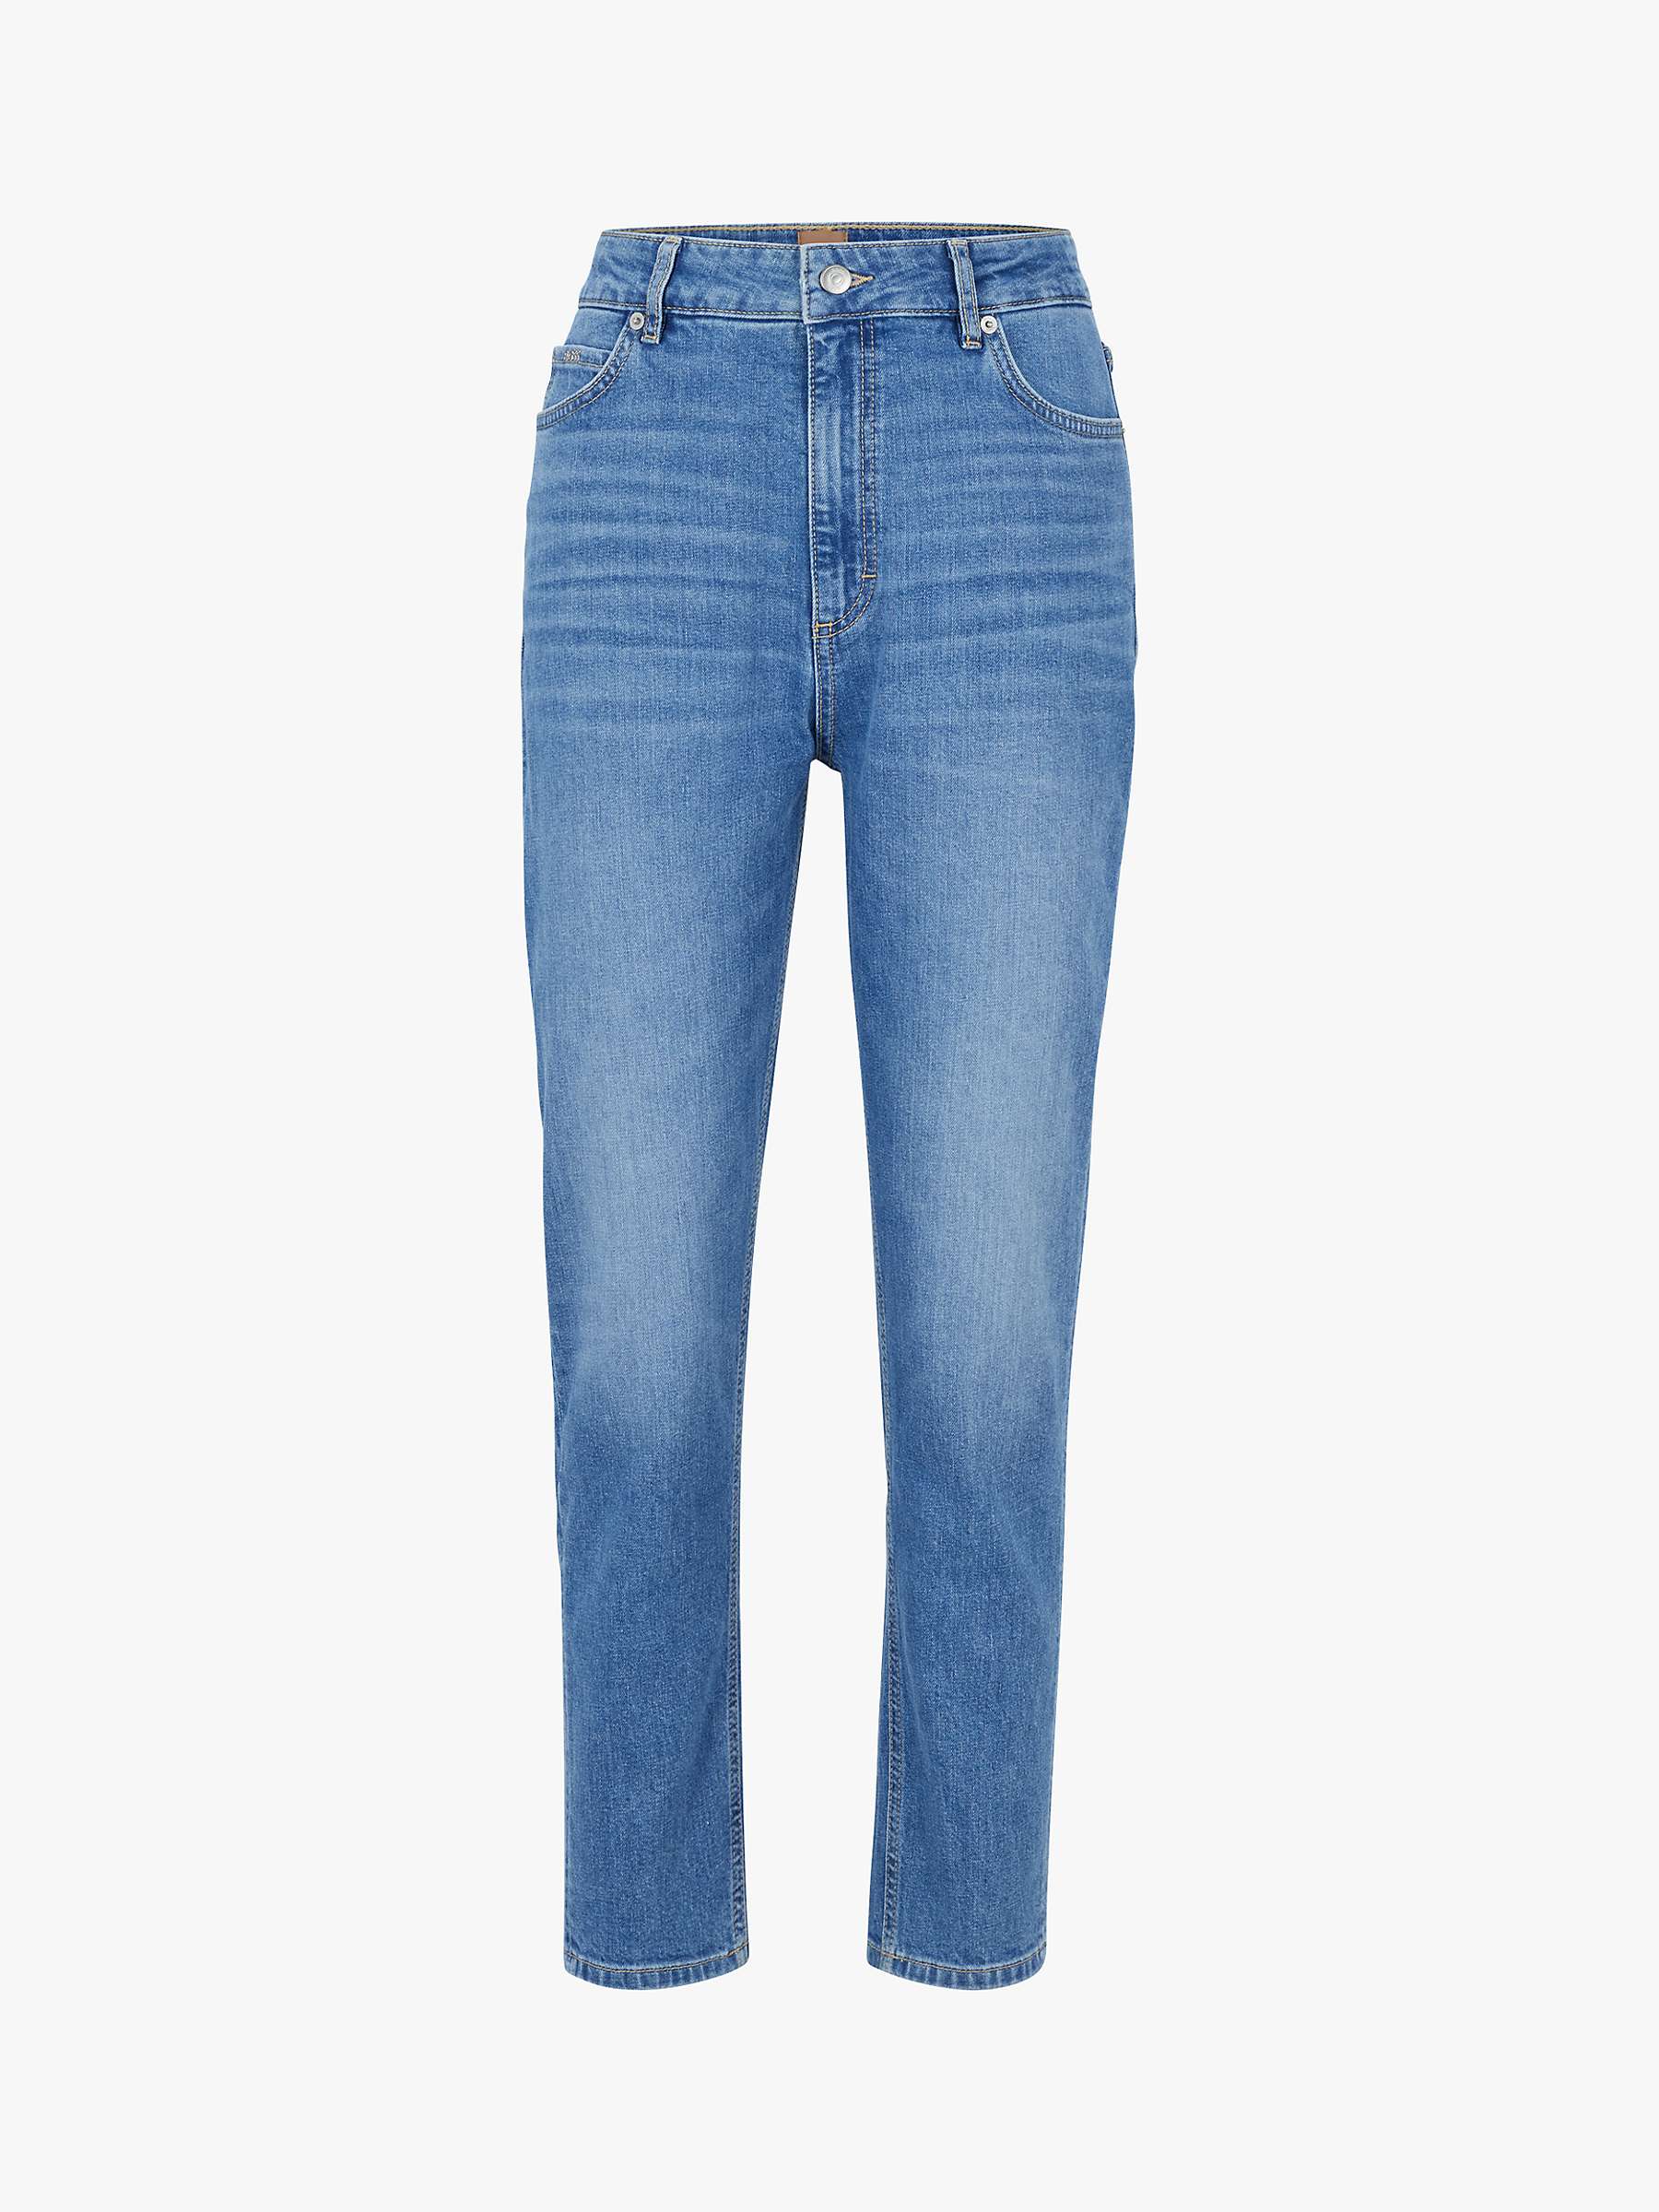 BOSS Ruth Tapered Jeans, Bright Blue at John Lewis & Partners